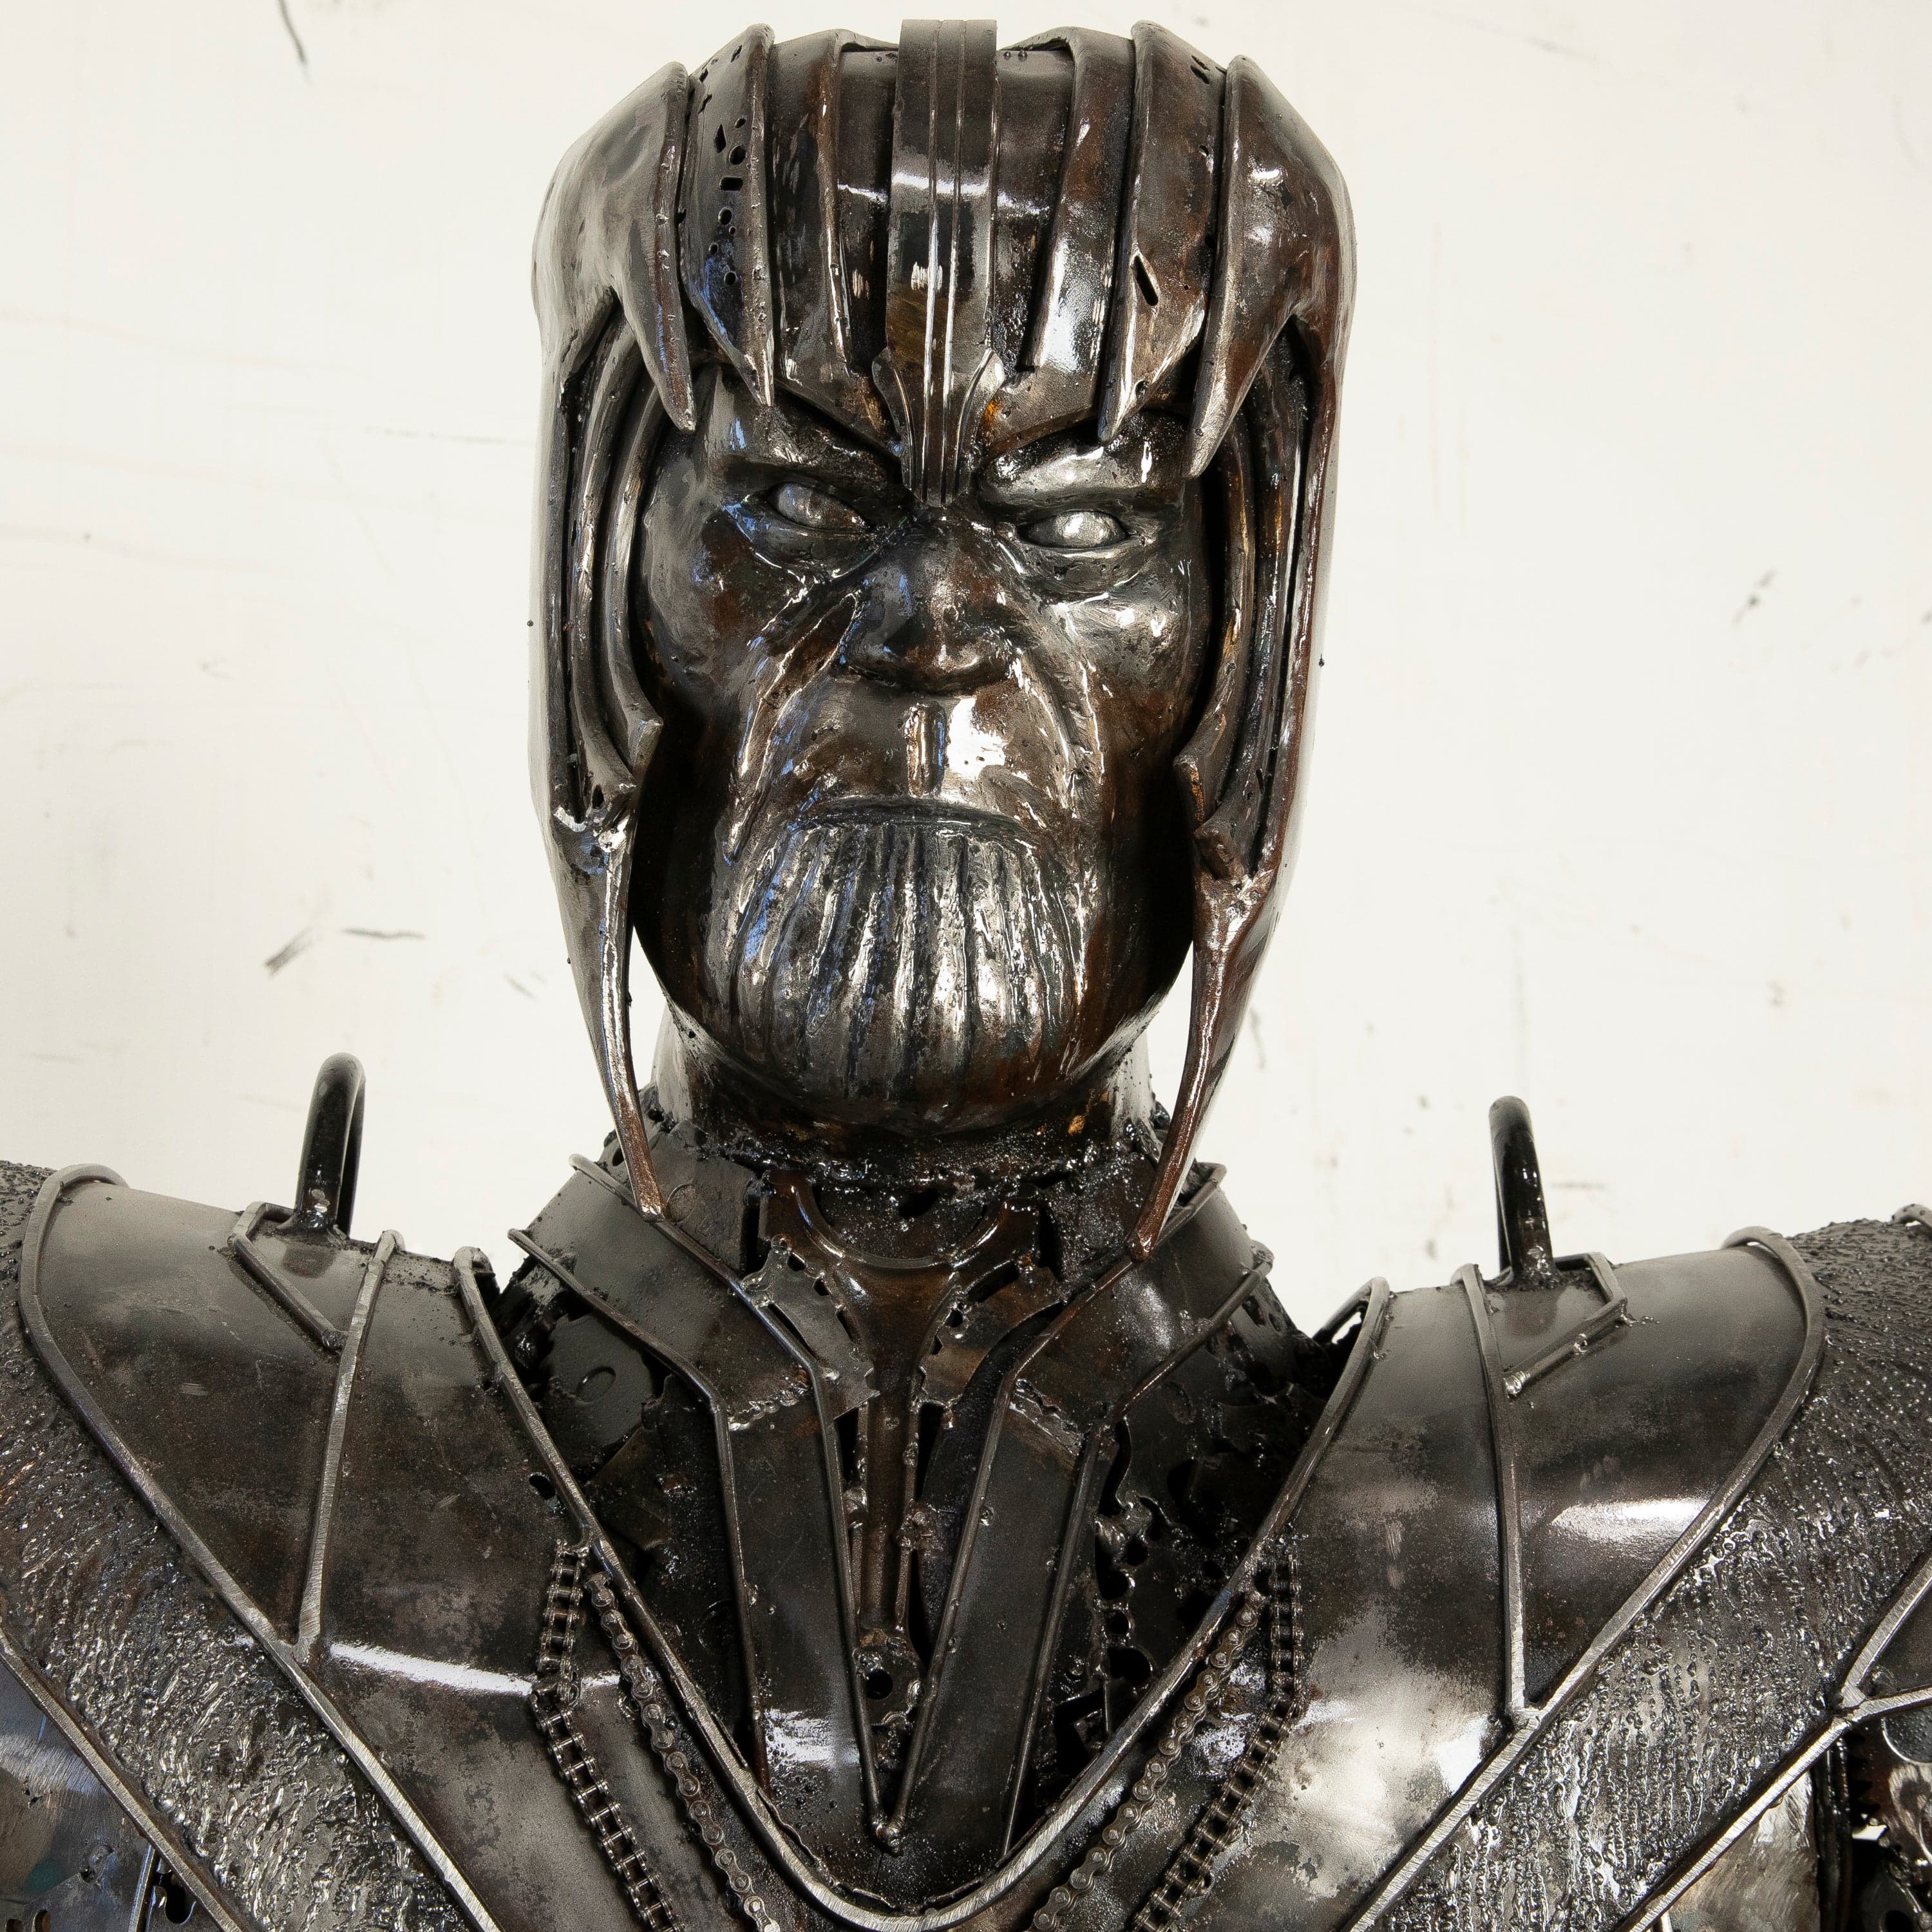 Kalifano Recycled Metal Art 91" Thanos Inspired Recycled Metal Art Sculpture RMS-THAN230-N